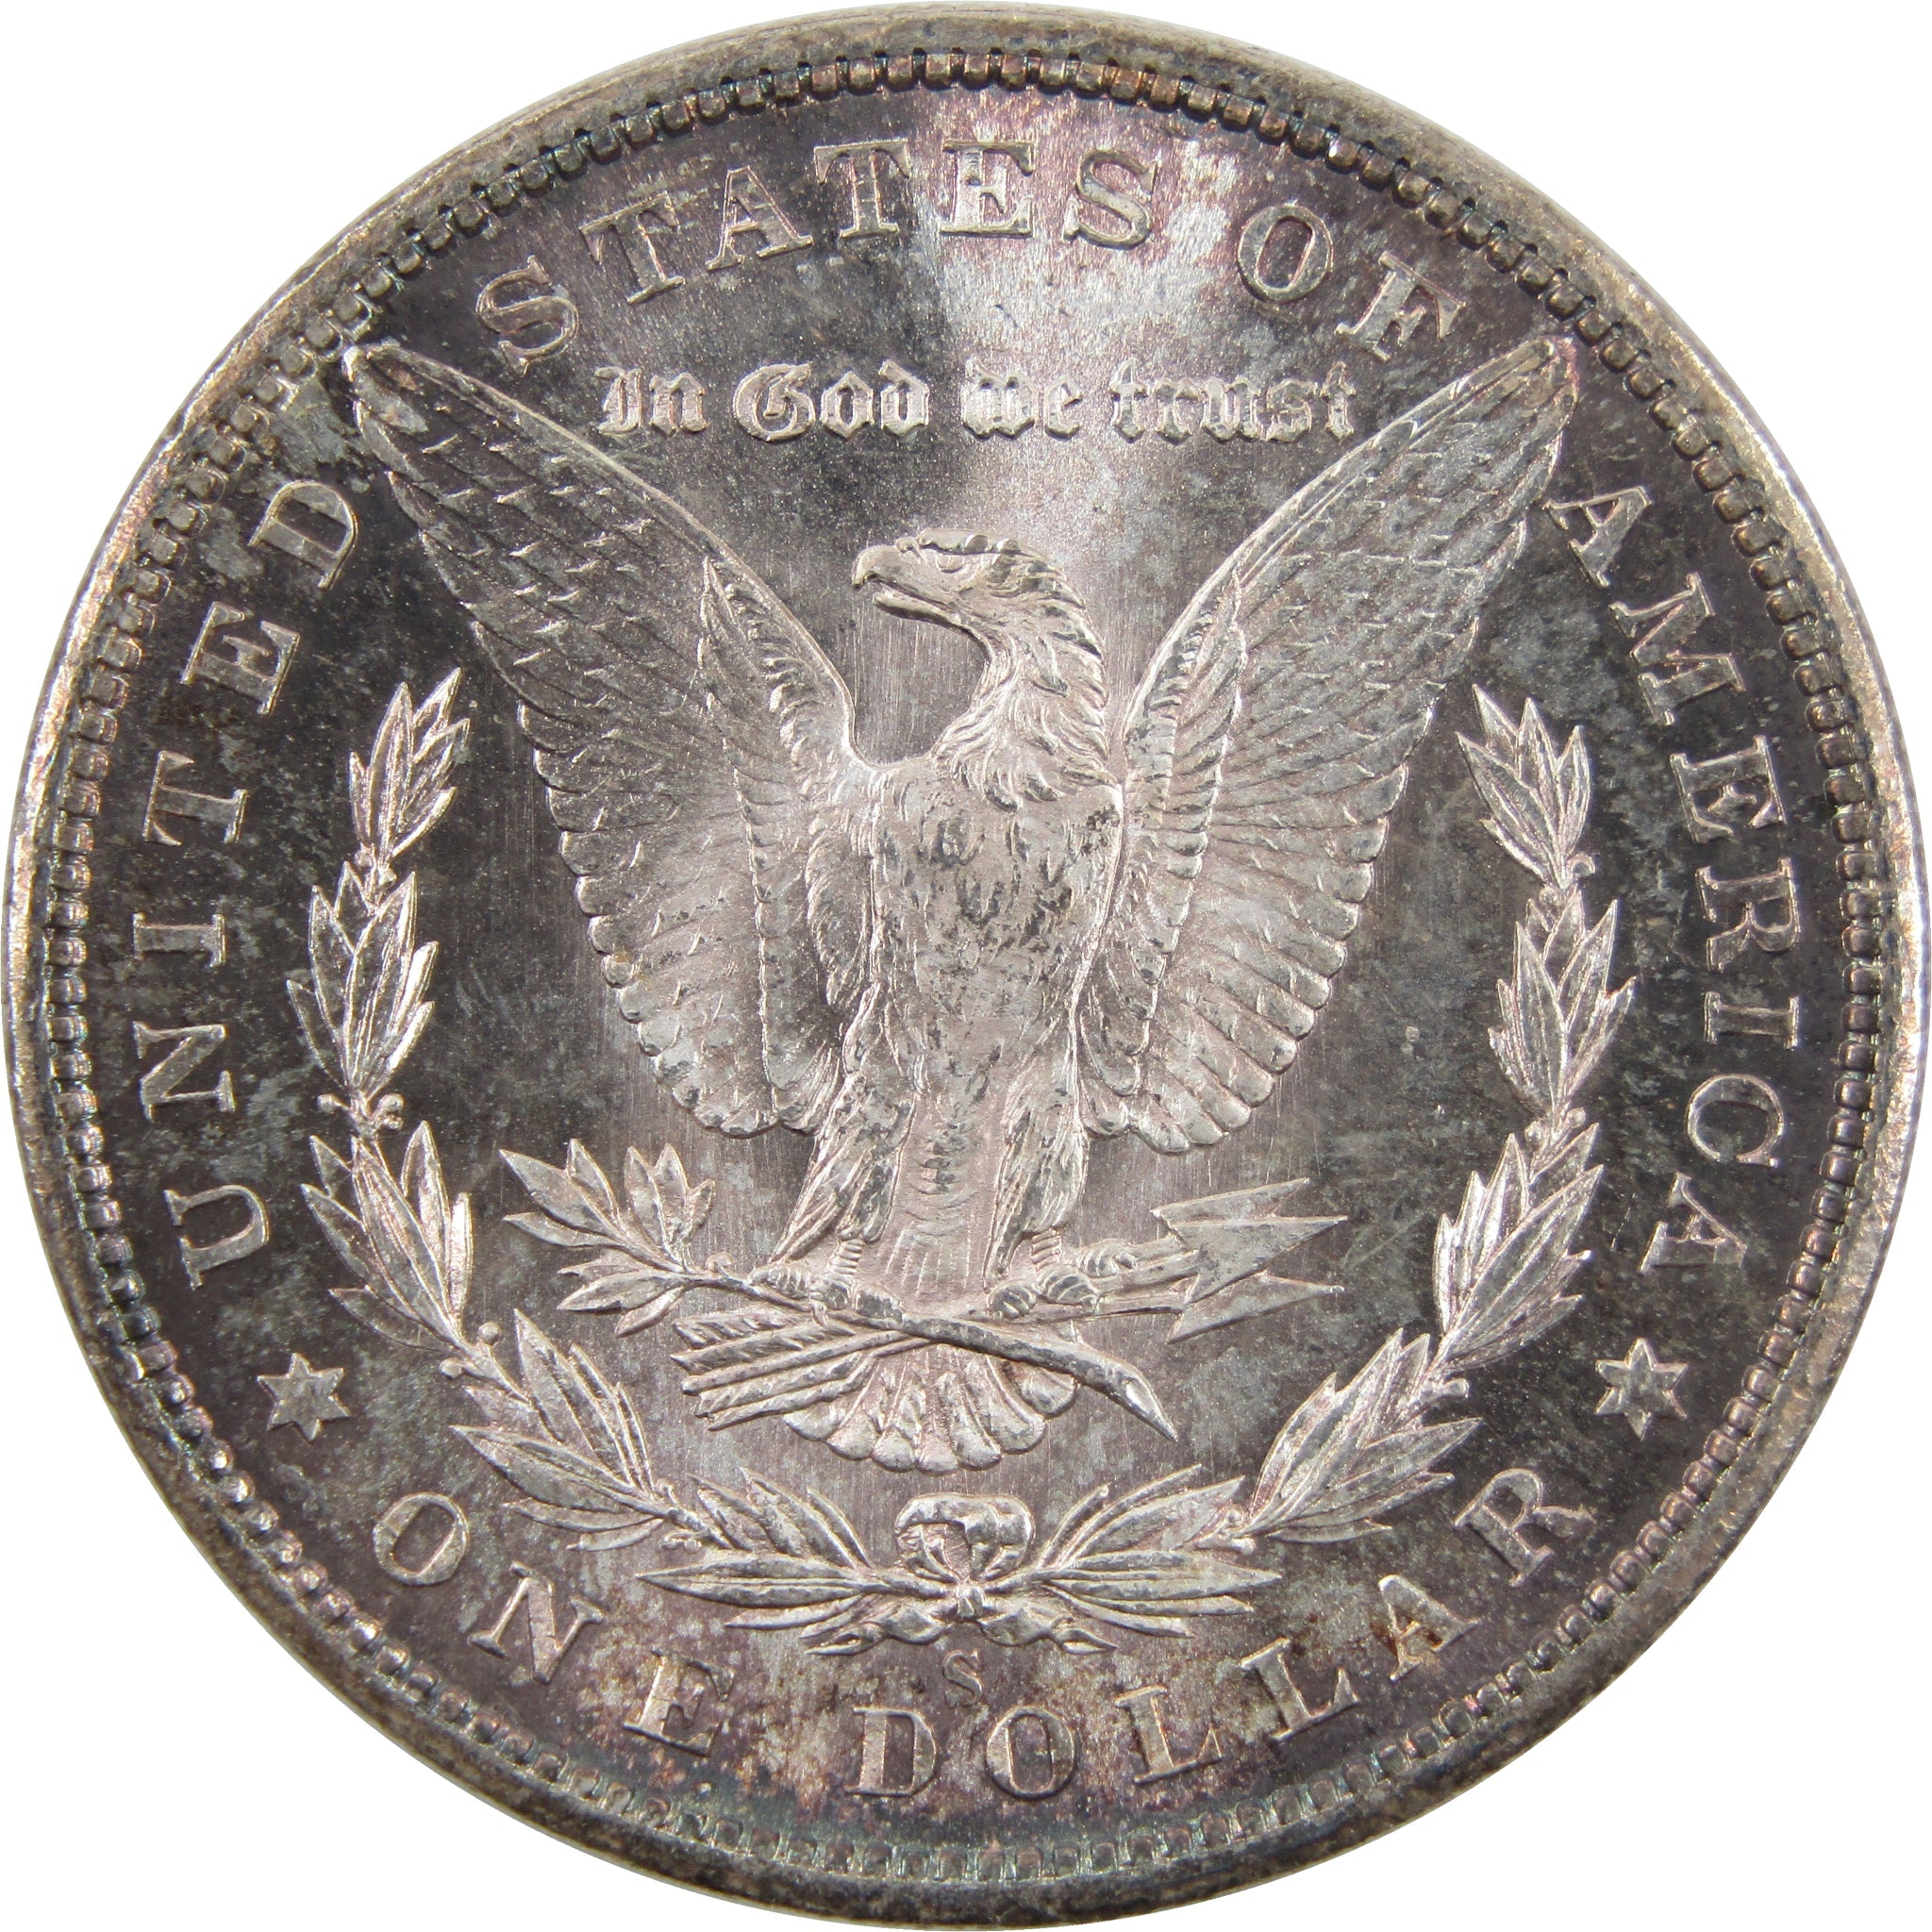 1880 S Morgan Dollar Choice Uncirculated Mint State Silver SKU:I2638 - Morgan coin - Morgan silver dollar - Morgan silver dollar for sale - Profile Coins &amp; Collectibles